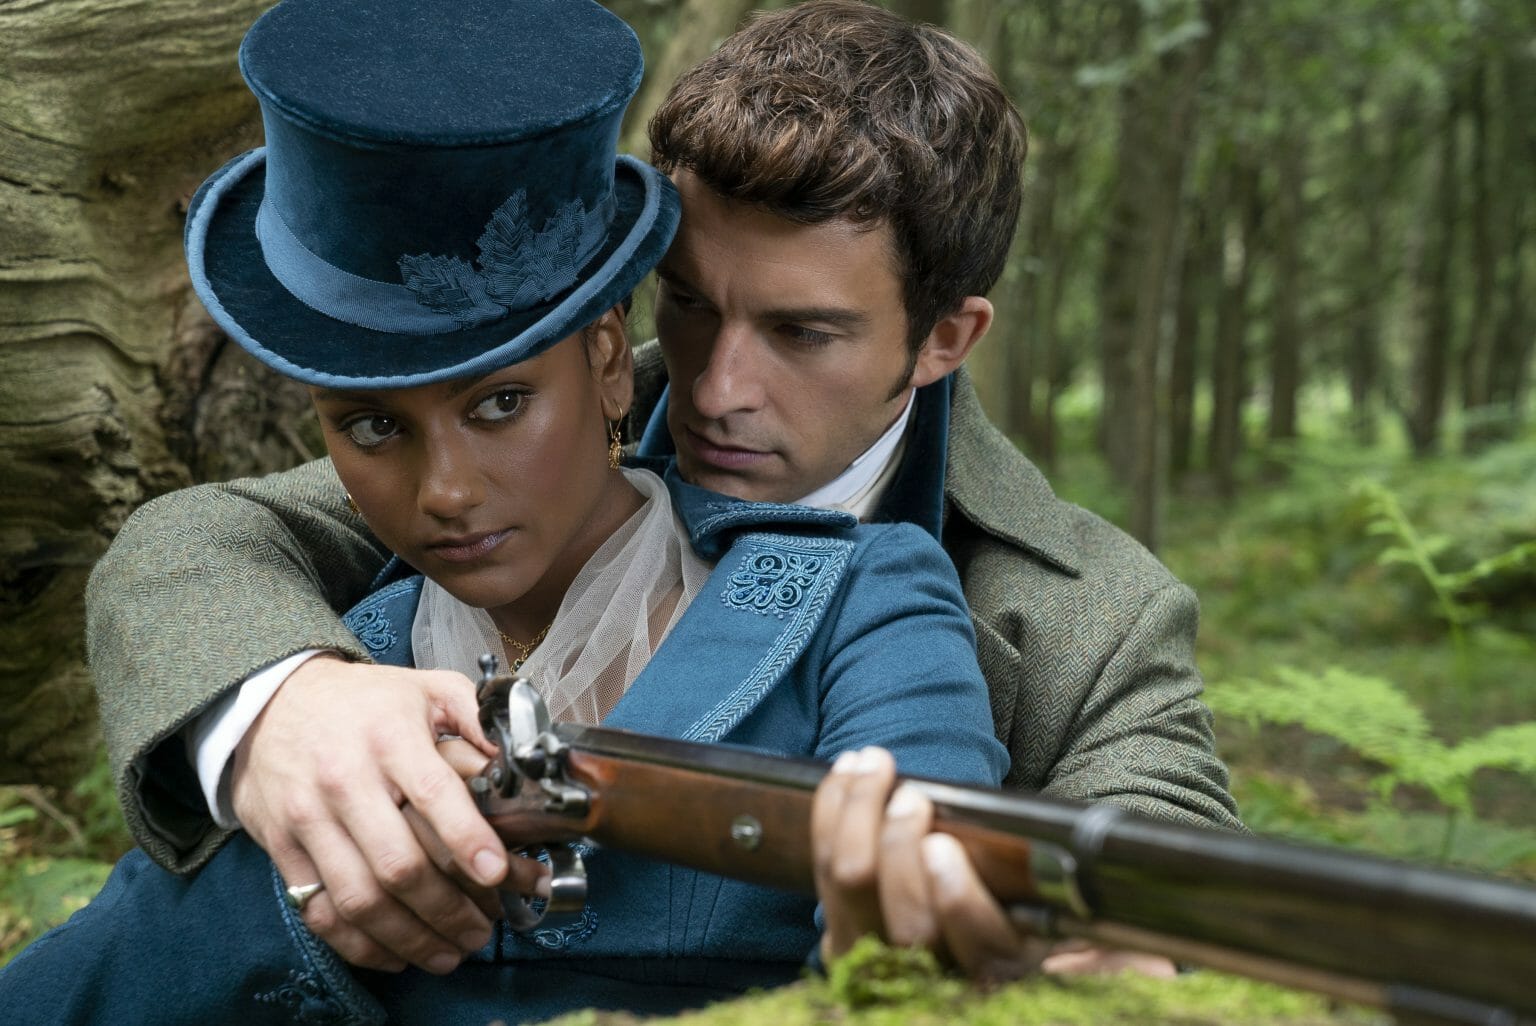 Anthony Bridgeton played by Jonathan Bailey wraps his arms around Kate Sharma played by Simone Ashley as he teaches her how to shoot a rifle while they both wear fancy dress attire in season 2 of BRIDGERTON on Netflix.